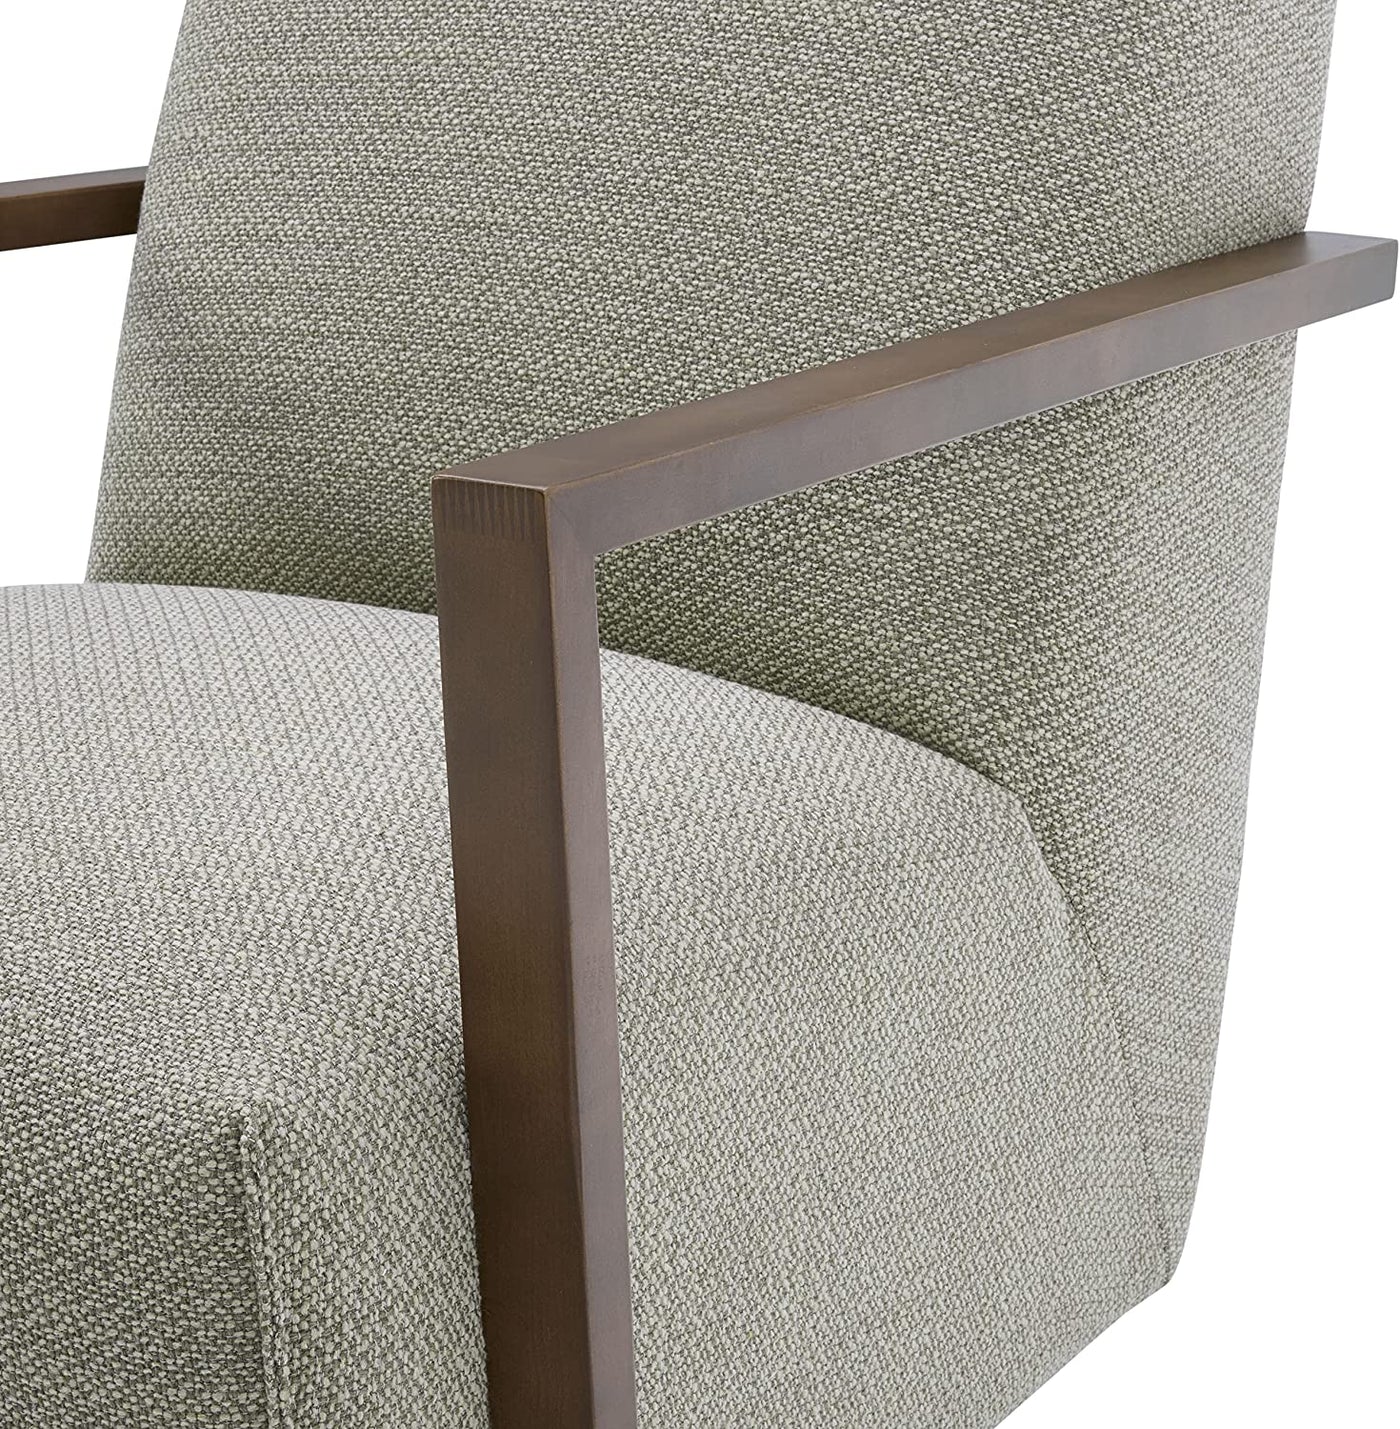 Rivet Contemporary Upholstered Glider Accent Chair, 30.3"W, Pumice - $375